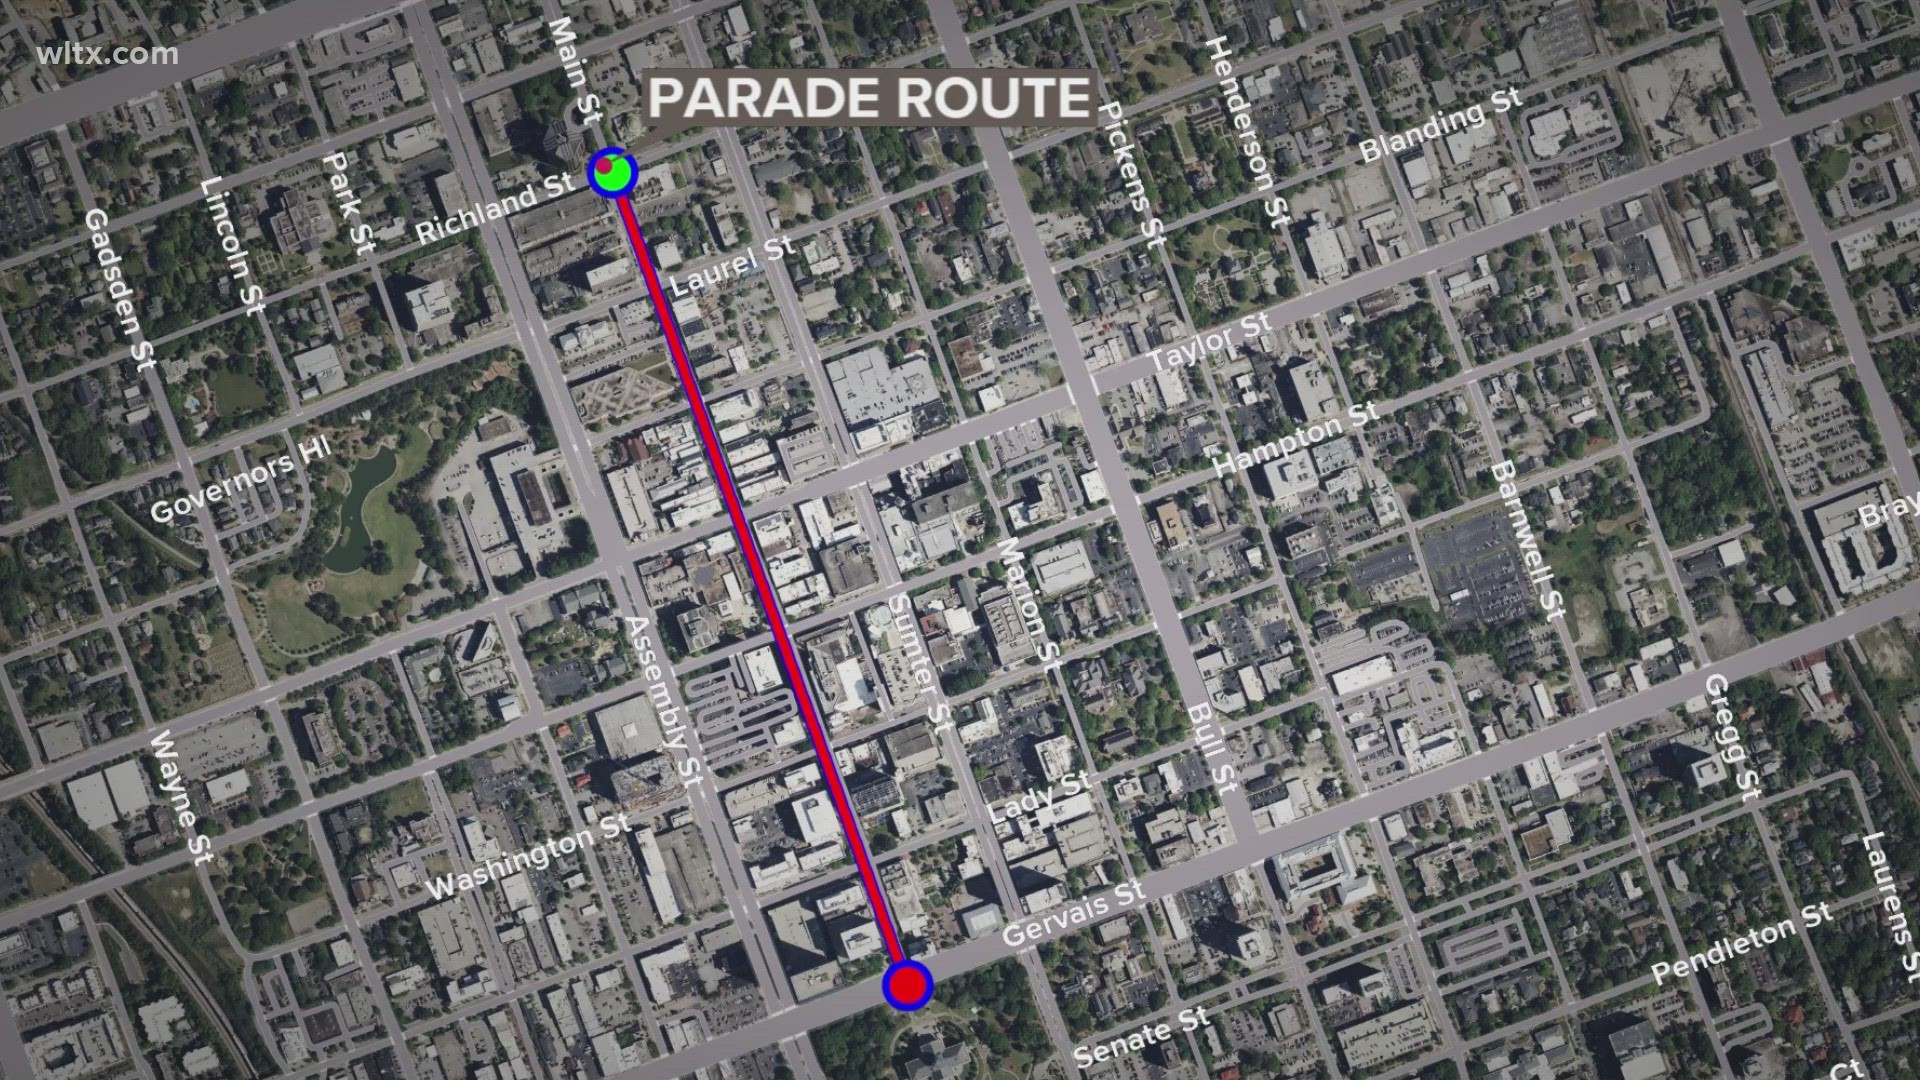 The city of Columbia put out road closures for Sunday's USC women's championship parade.